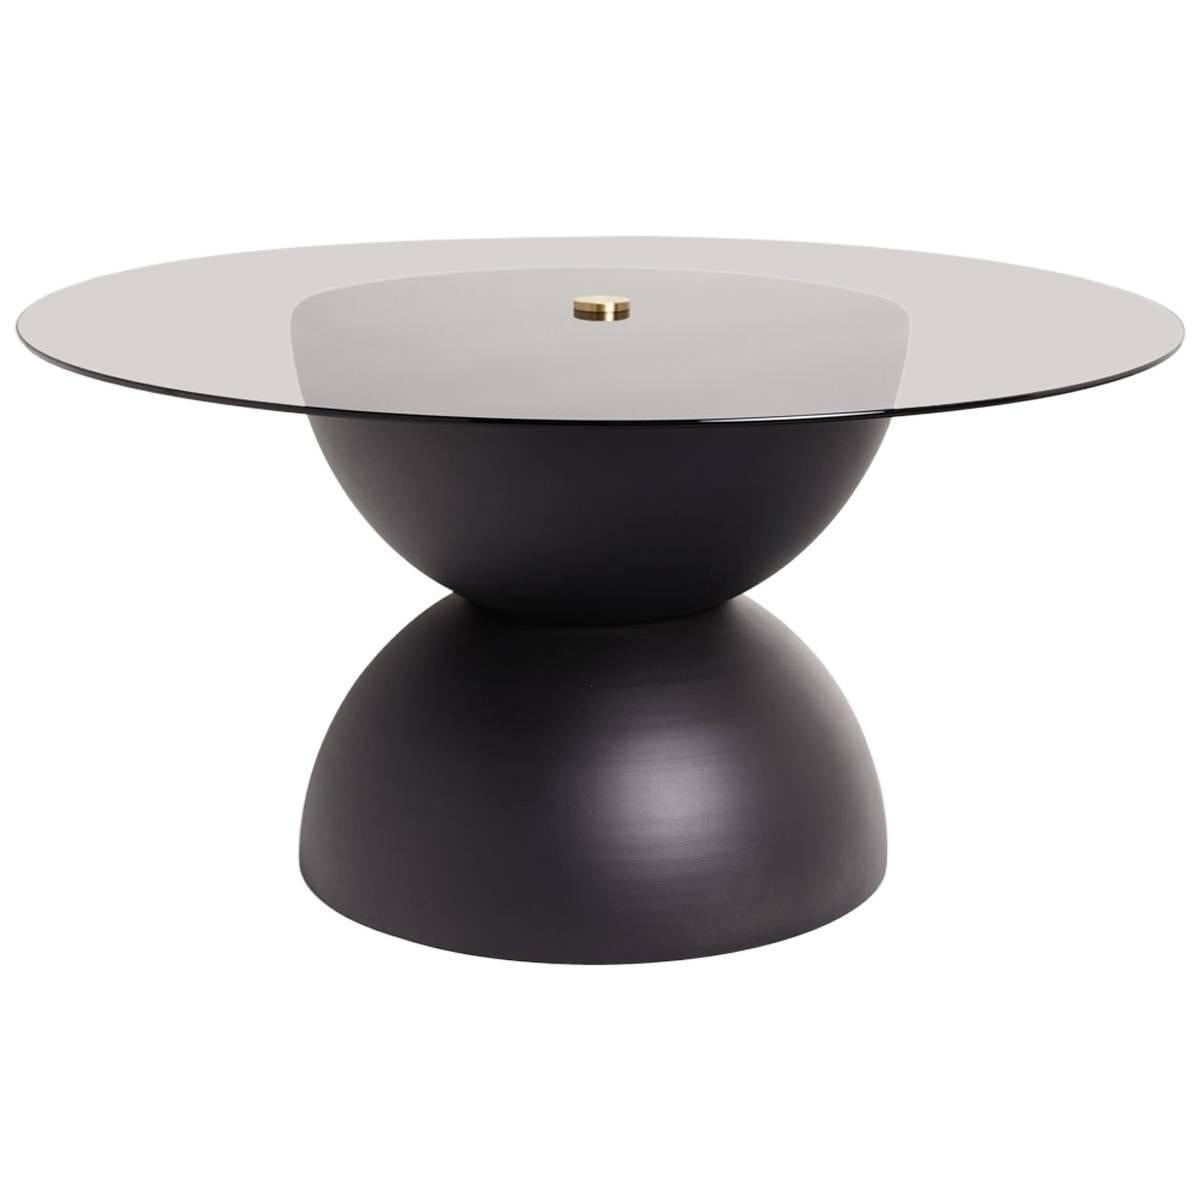 Ellipse Dining Table, Aluminium Base and Glass Top 'Outdoor Friendly' For Sale